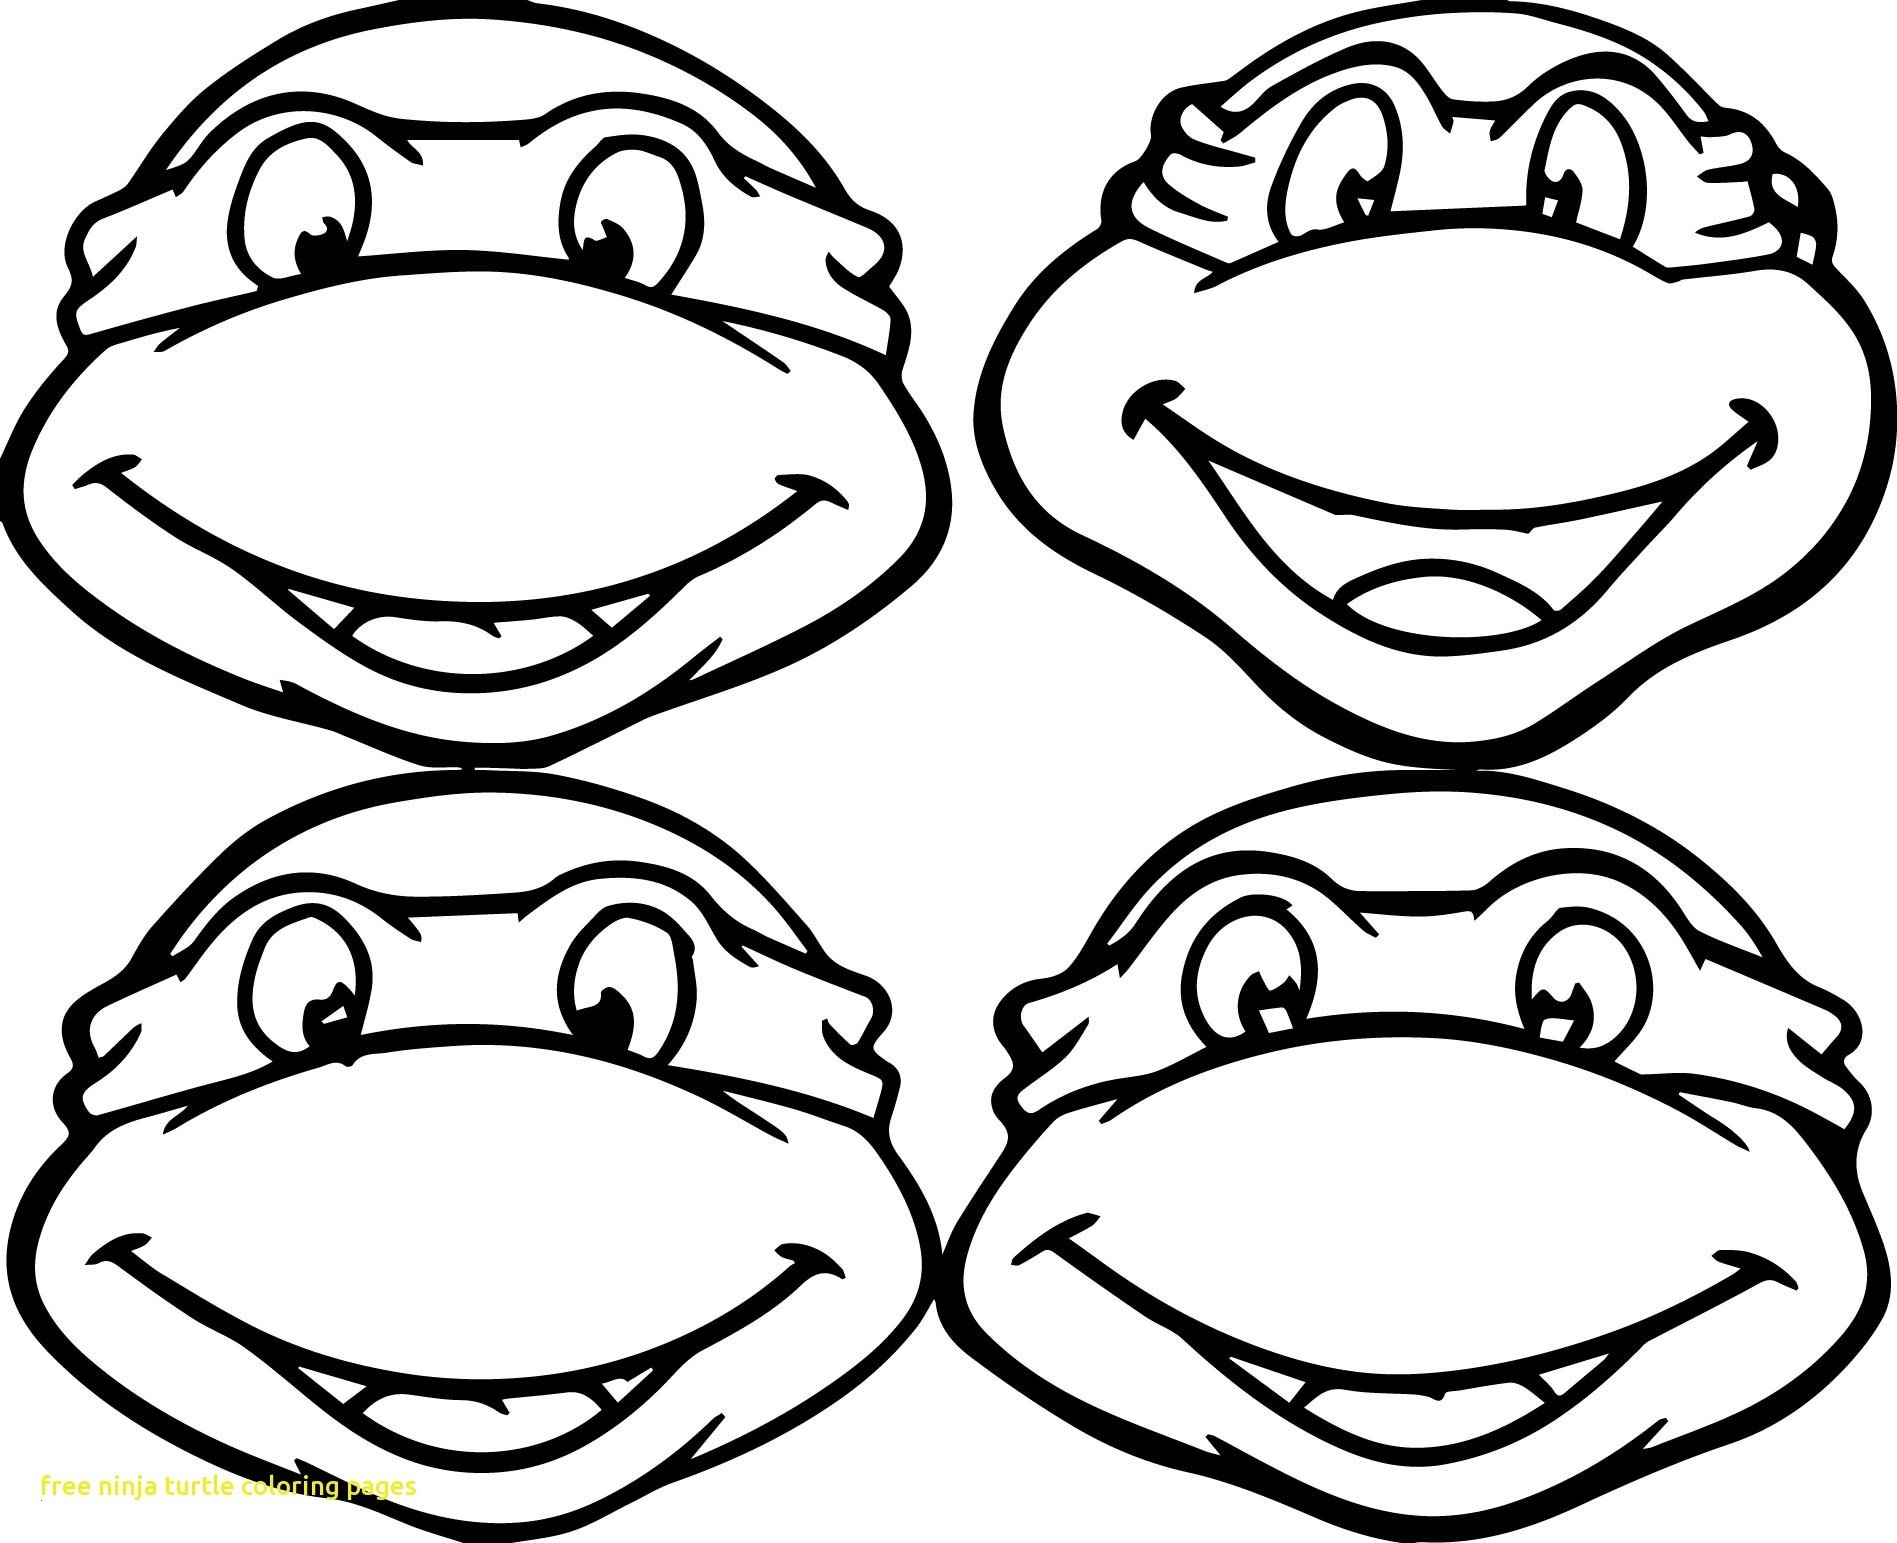 Ninja Turtle Face Drawing Free download on ClipArtMag